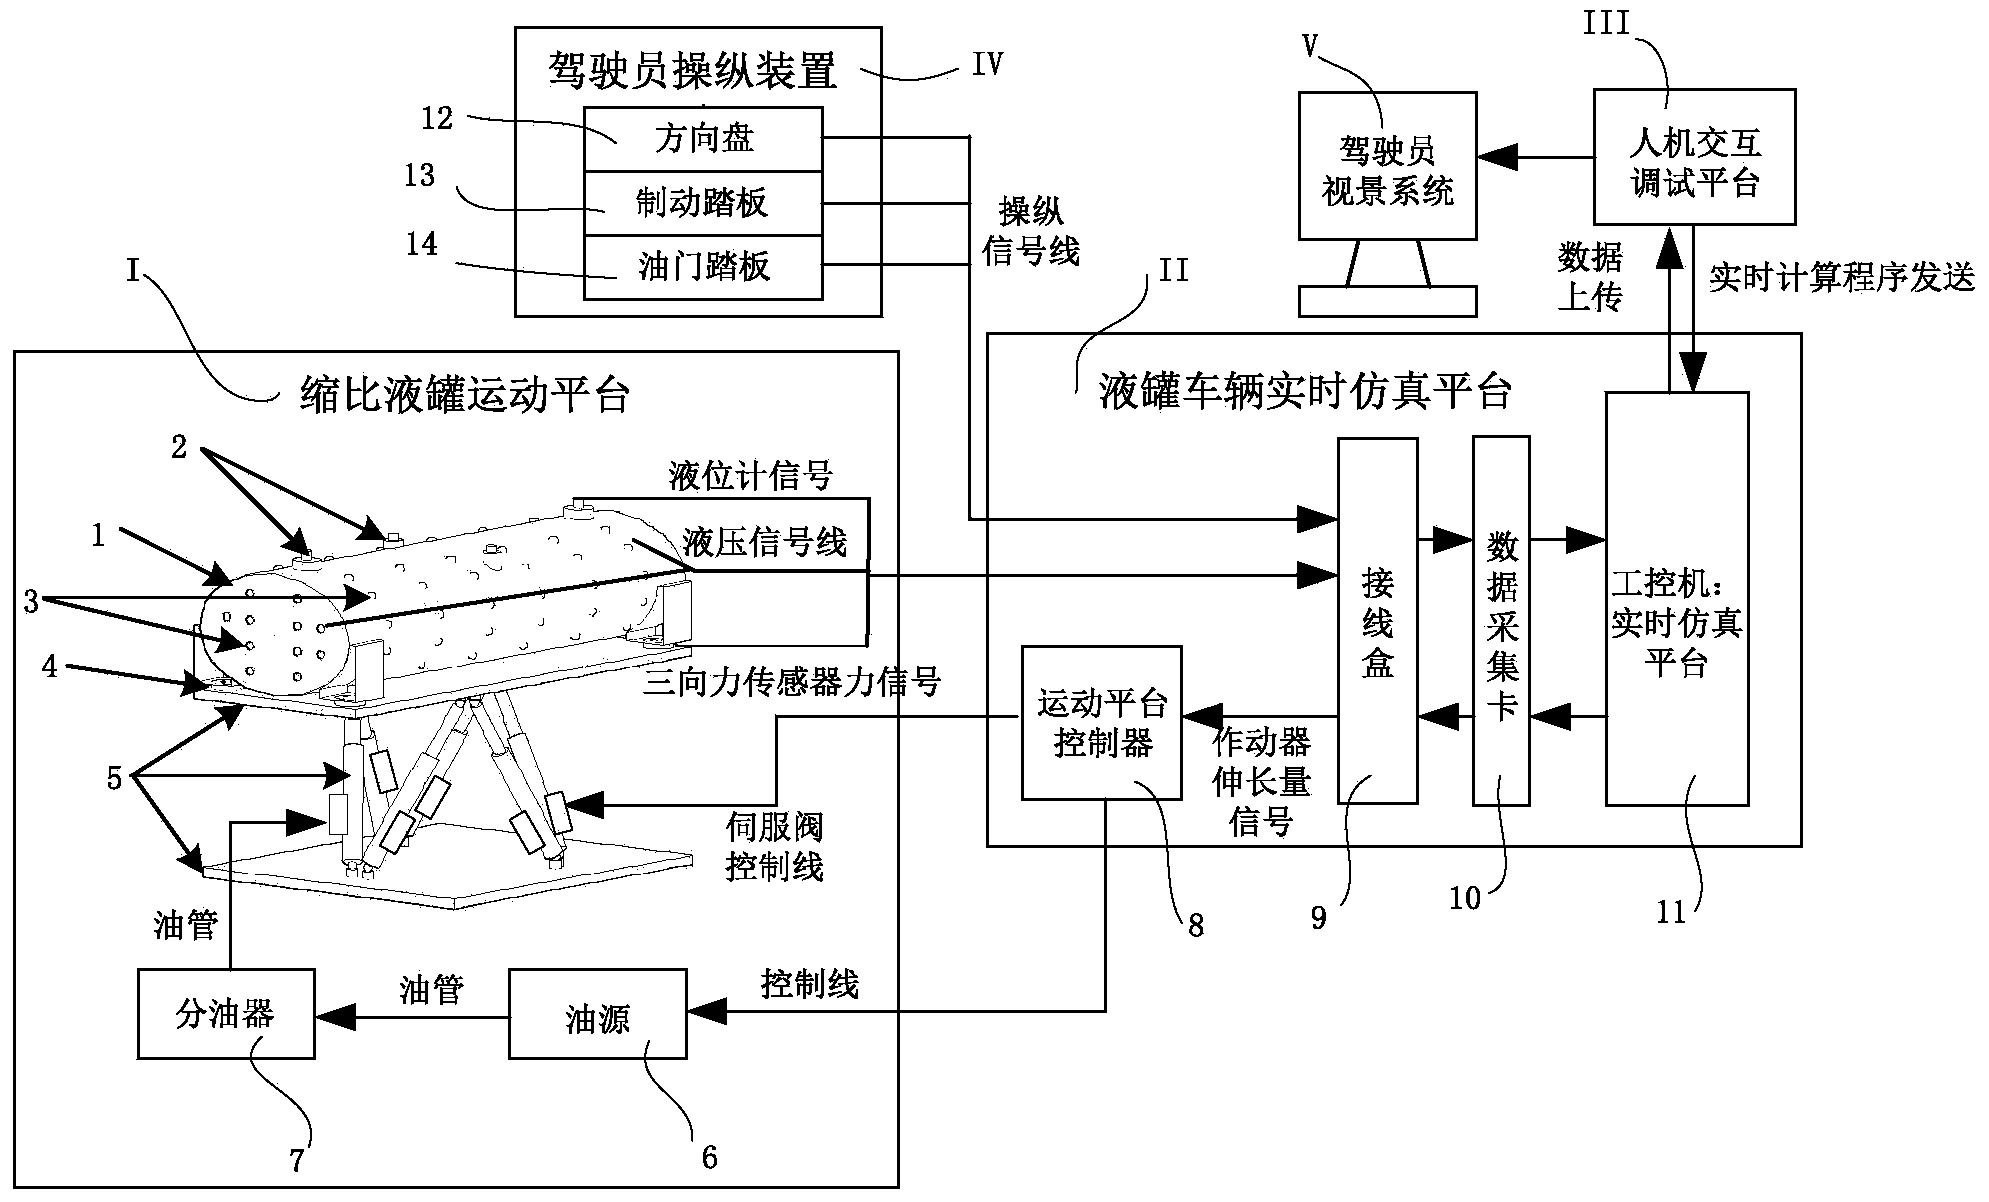 Fluid-solid two-way coupling real-time simulation test bench for tank truck